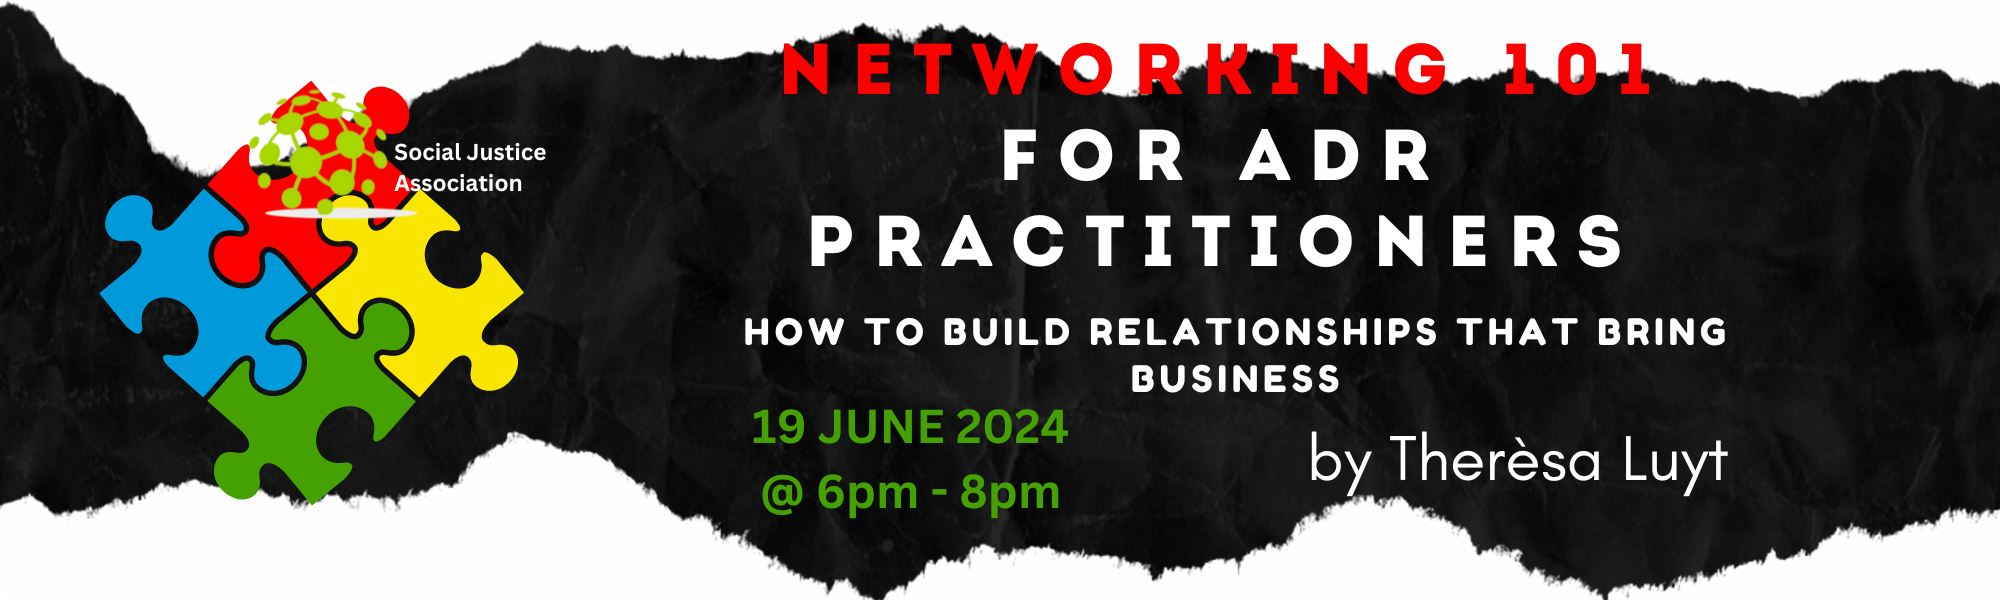 Networking 101 for ADR practitioners: How to build relationships that bring business